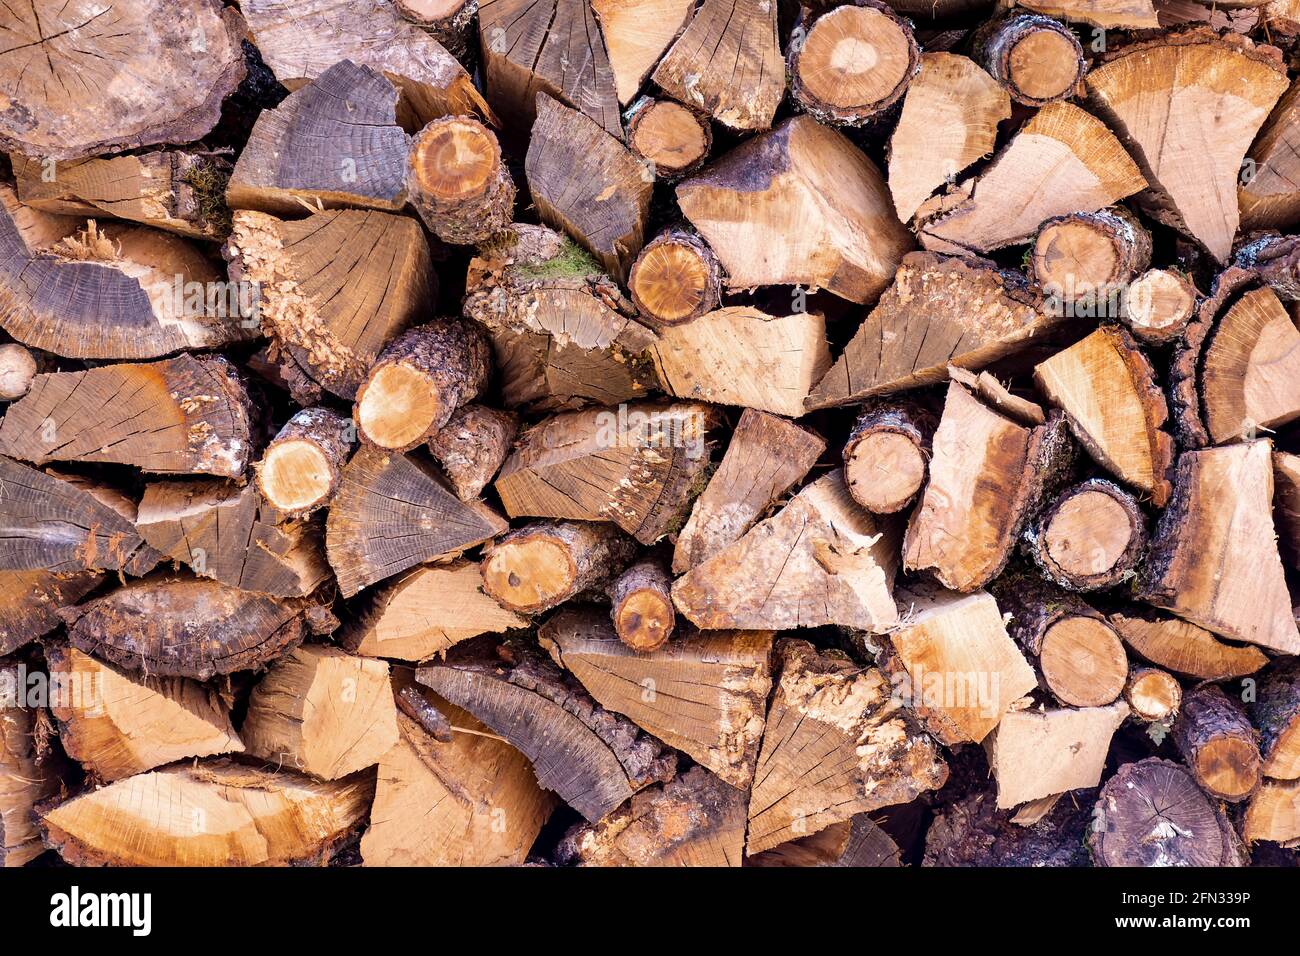 Stacked firewood that will serve as stock for the winter.The logs are already cut ready to be used in a cooker or fireplace.The photo is taken horizon Stock Photo